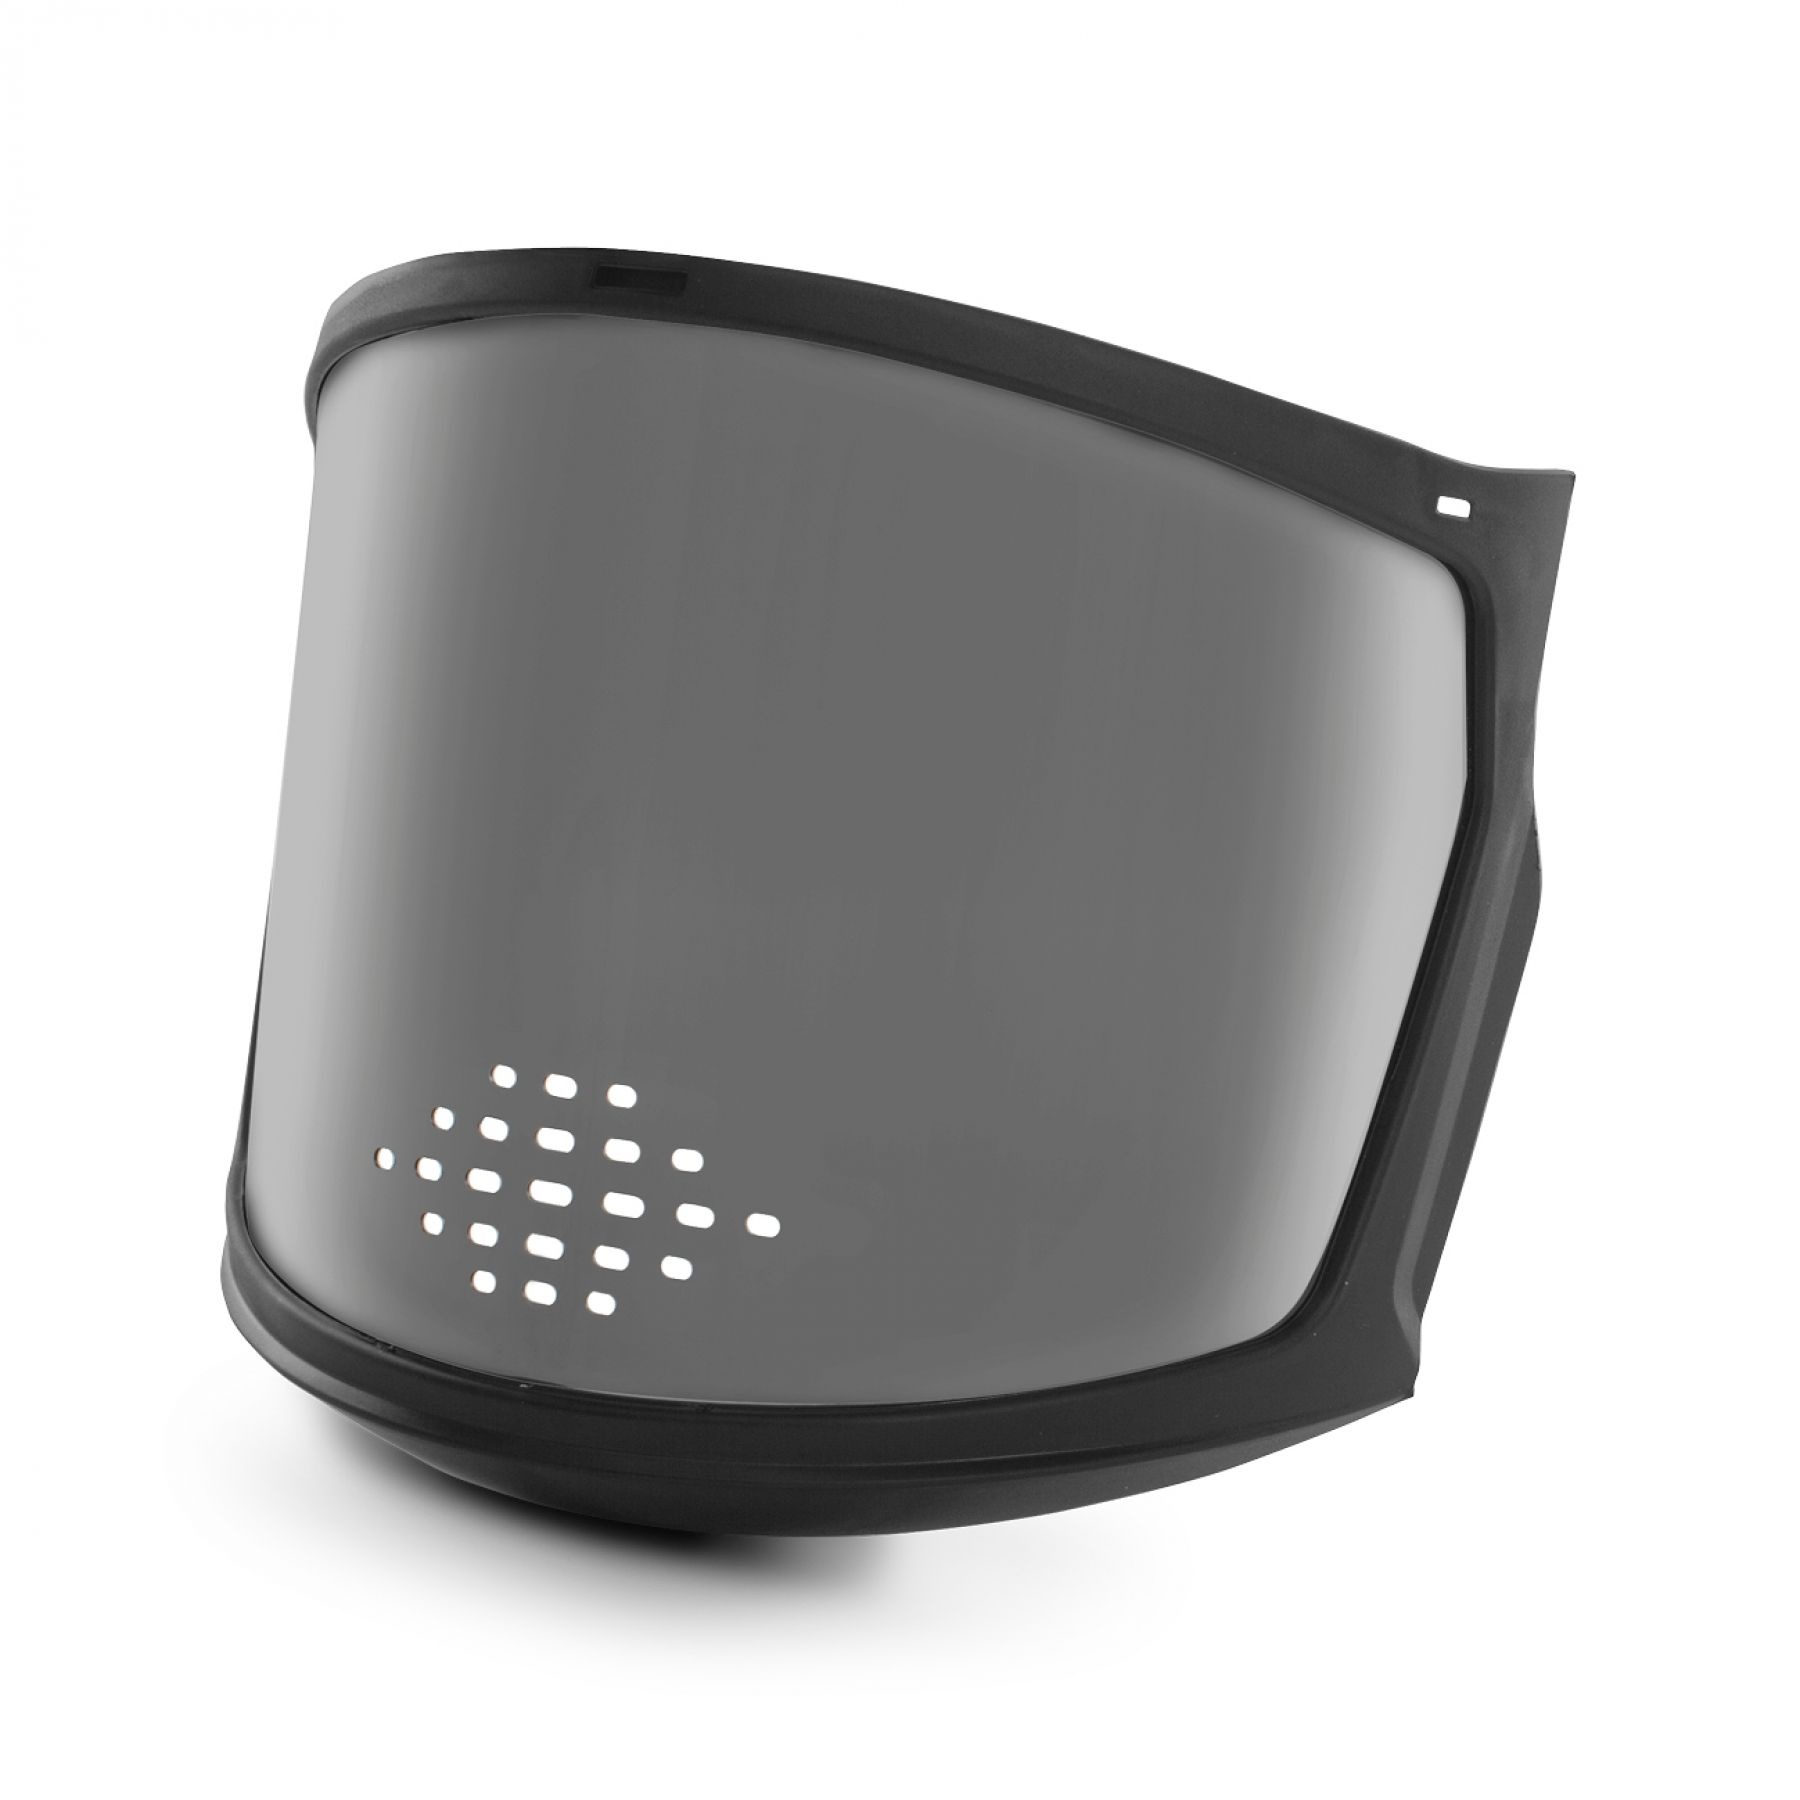 Kask Zen FF Air- Full Face Visor from Columbia Safety